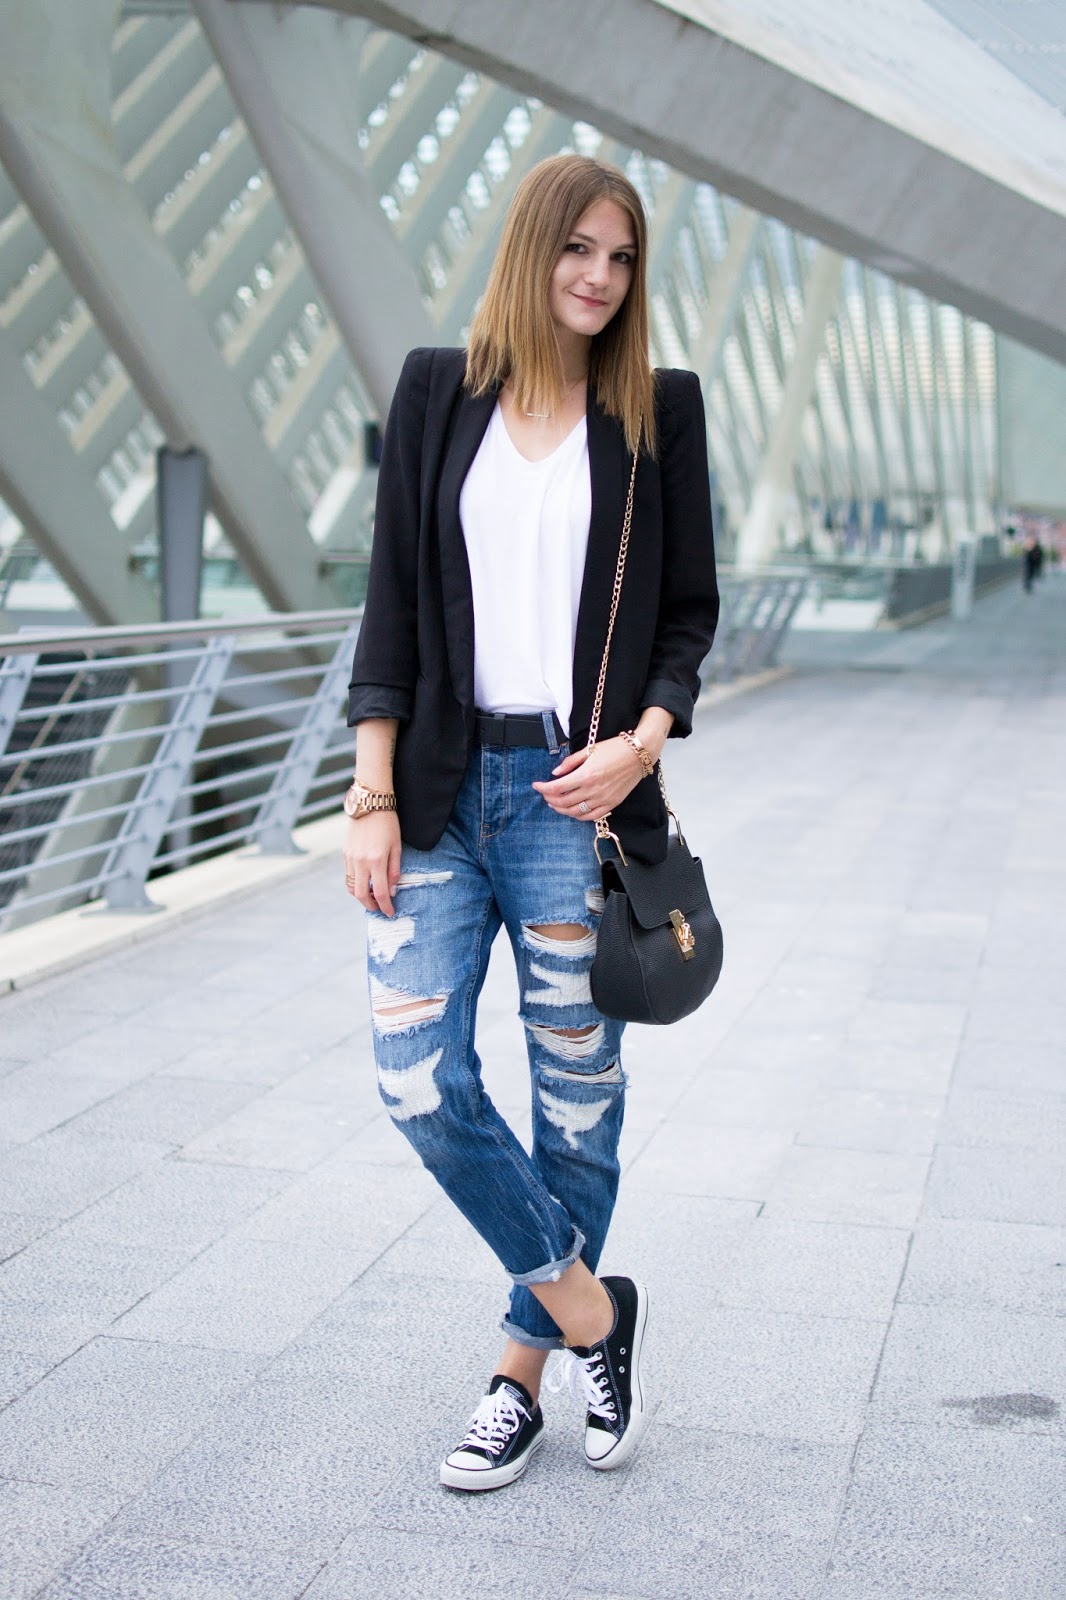 Top 55+ images boyfriend jeans and converse - In.thptnganamst.edu.vn